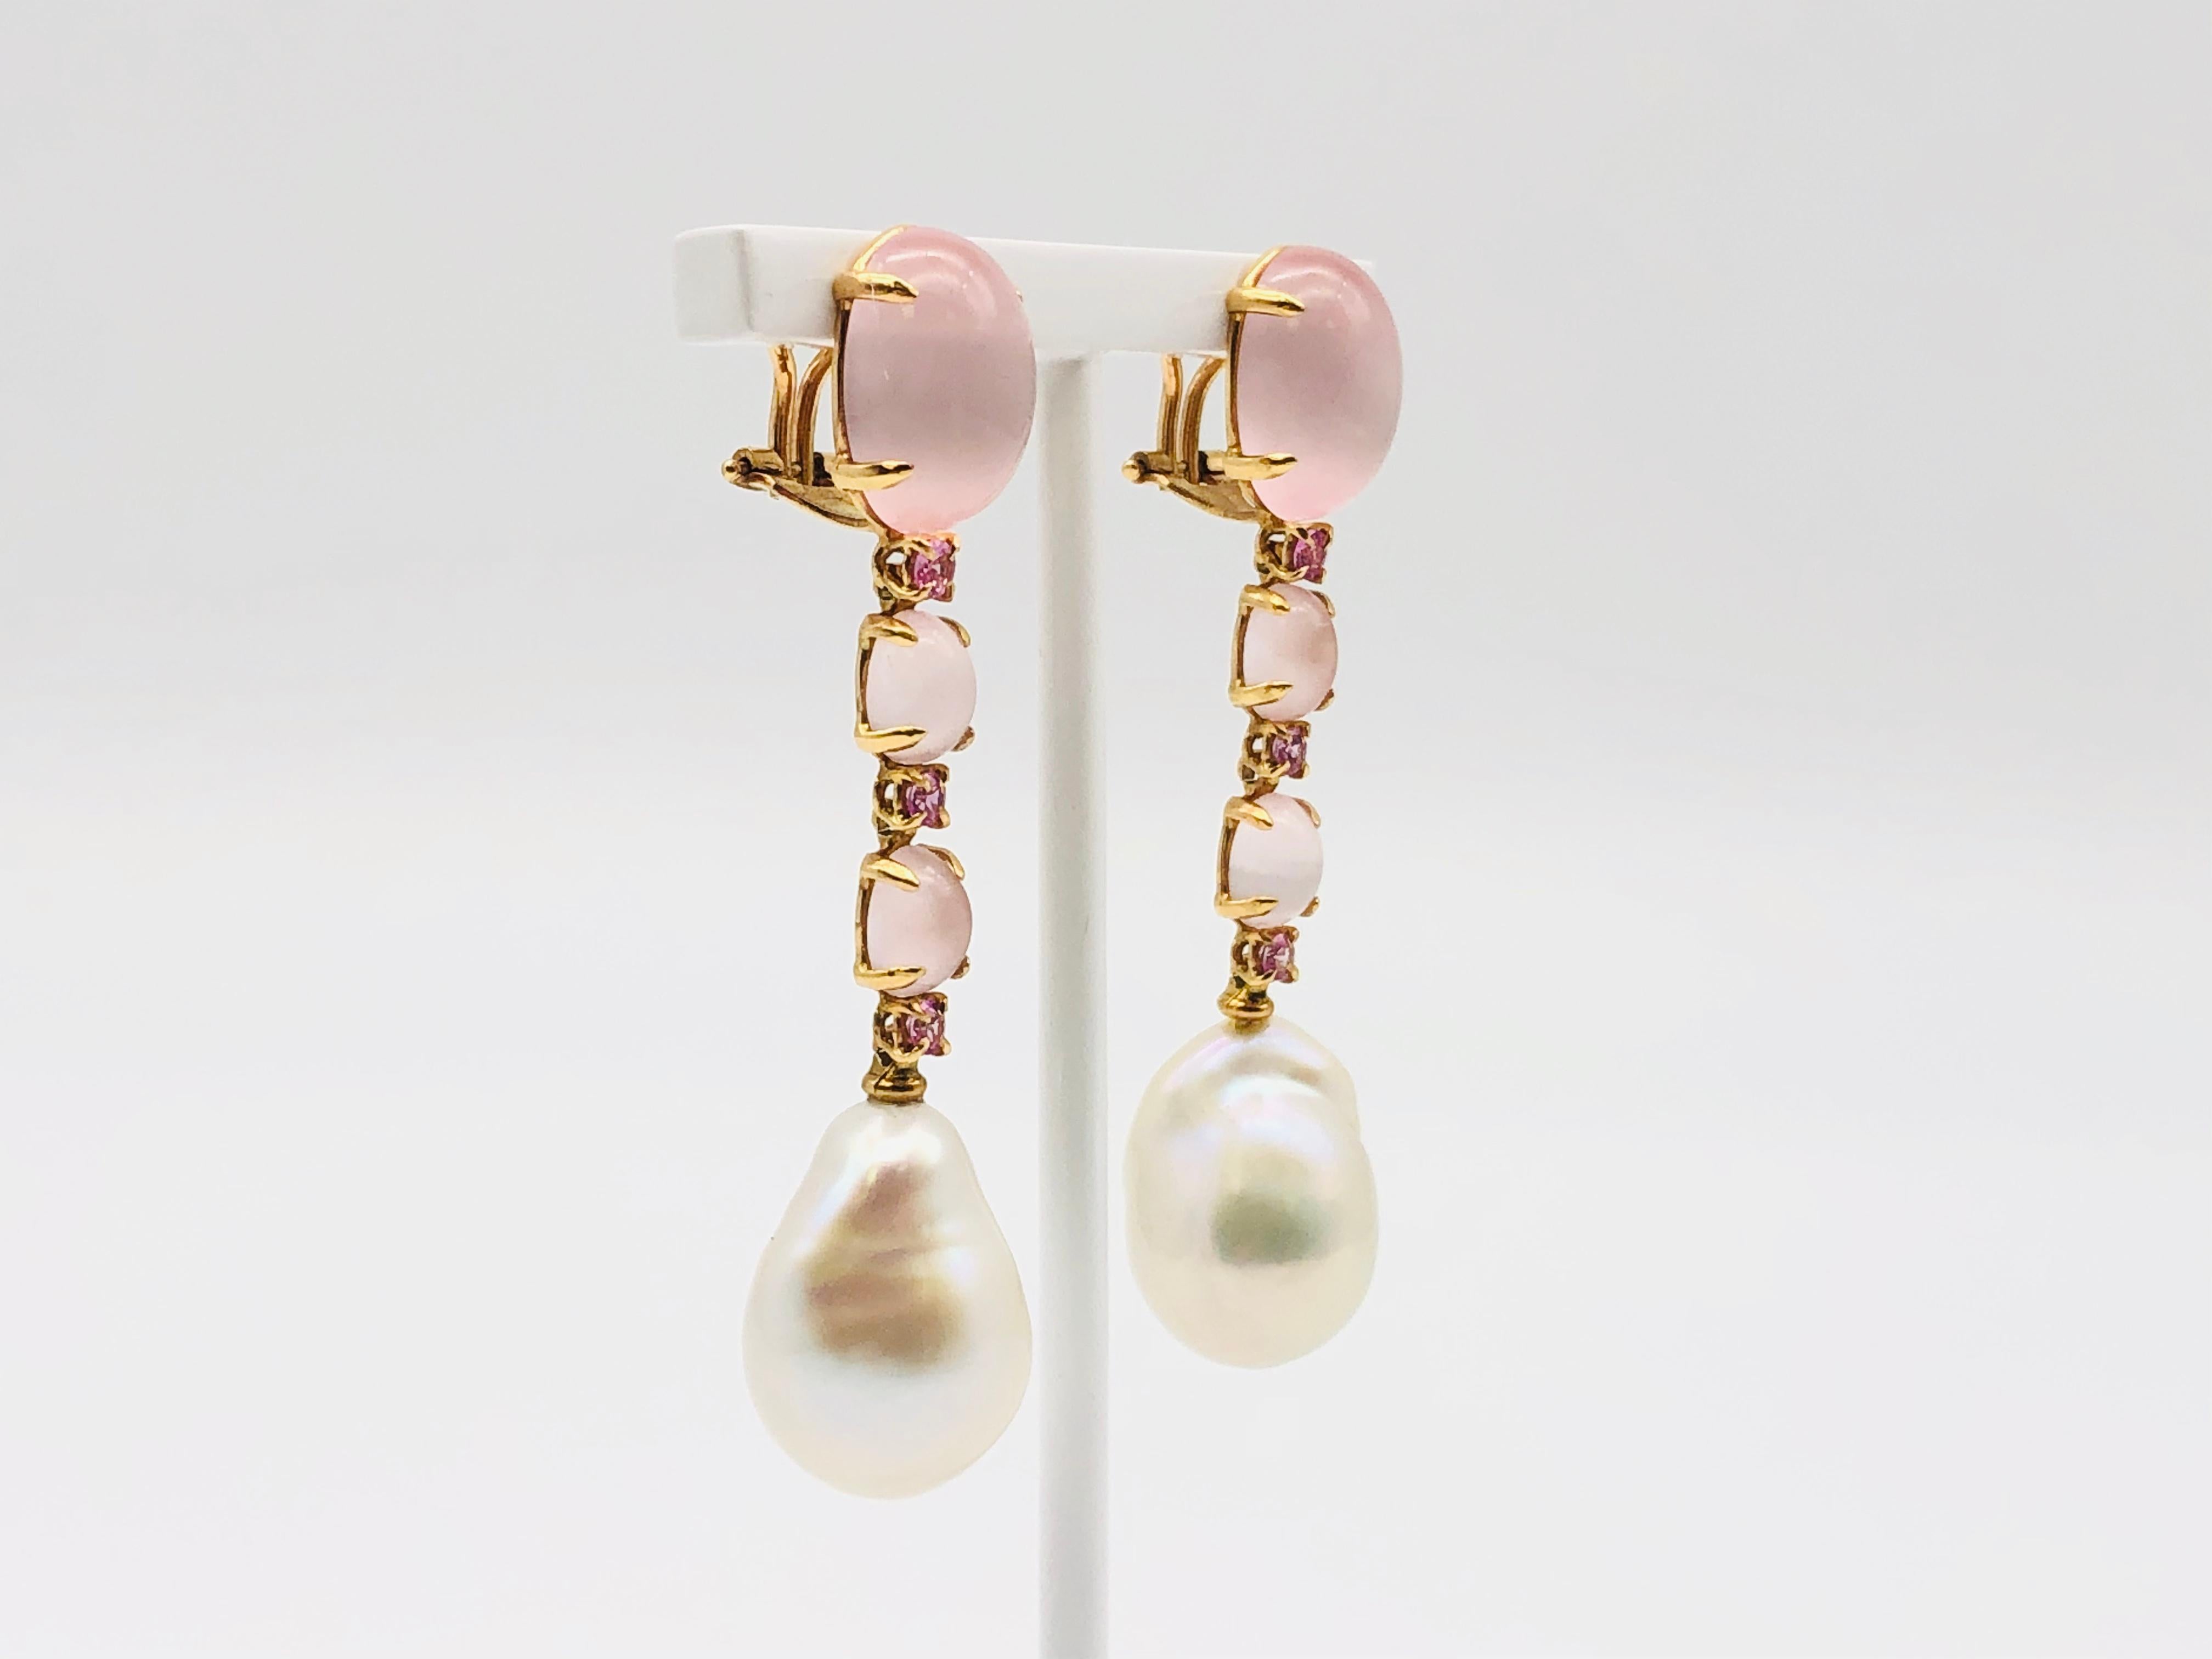 Discover this Quartz, Tourmalines and Baroque Pearls on Yellow Gold Earrings.
Quartz
Tourmalines
Freshwater Pearls
Yellow Gold 18 Carat